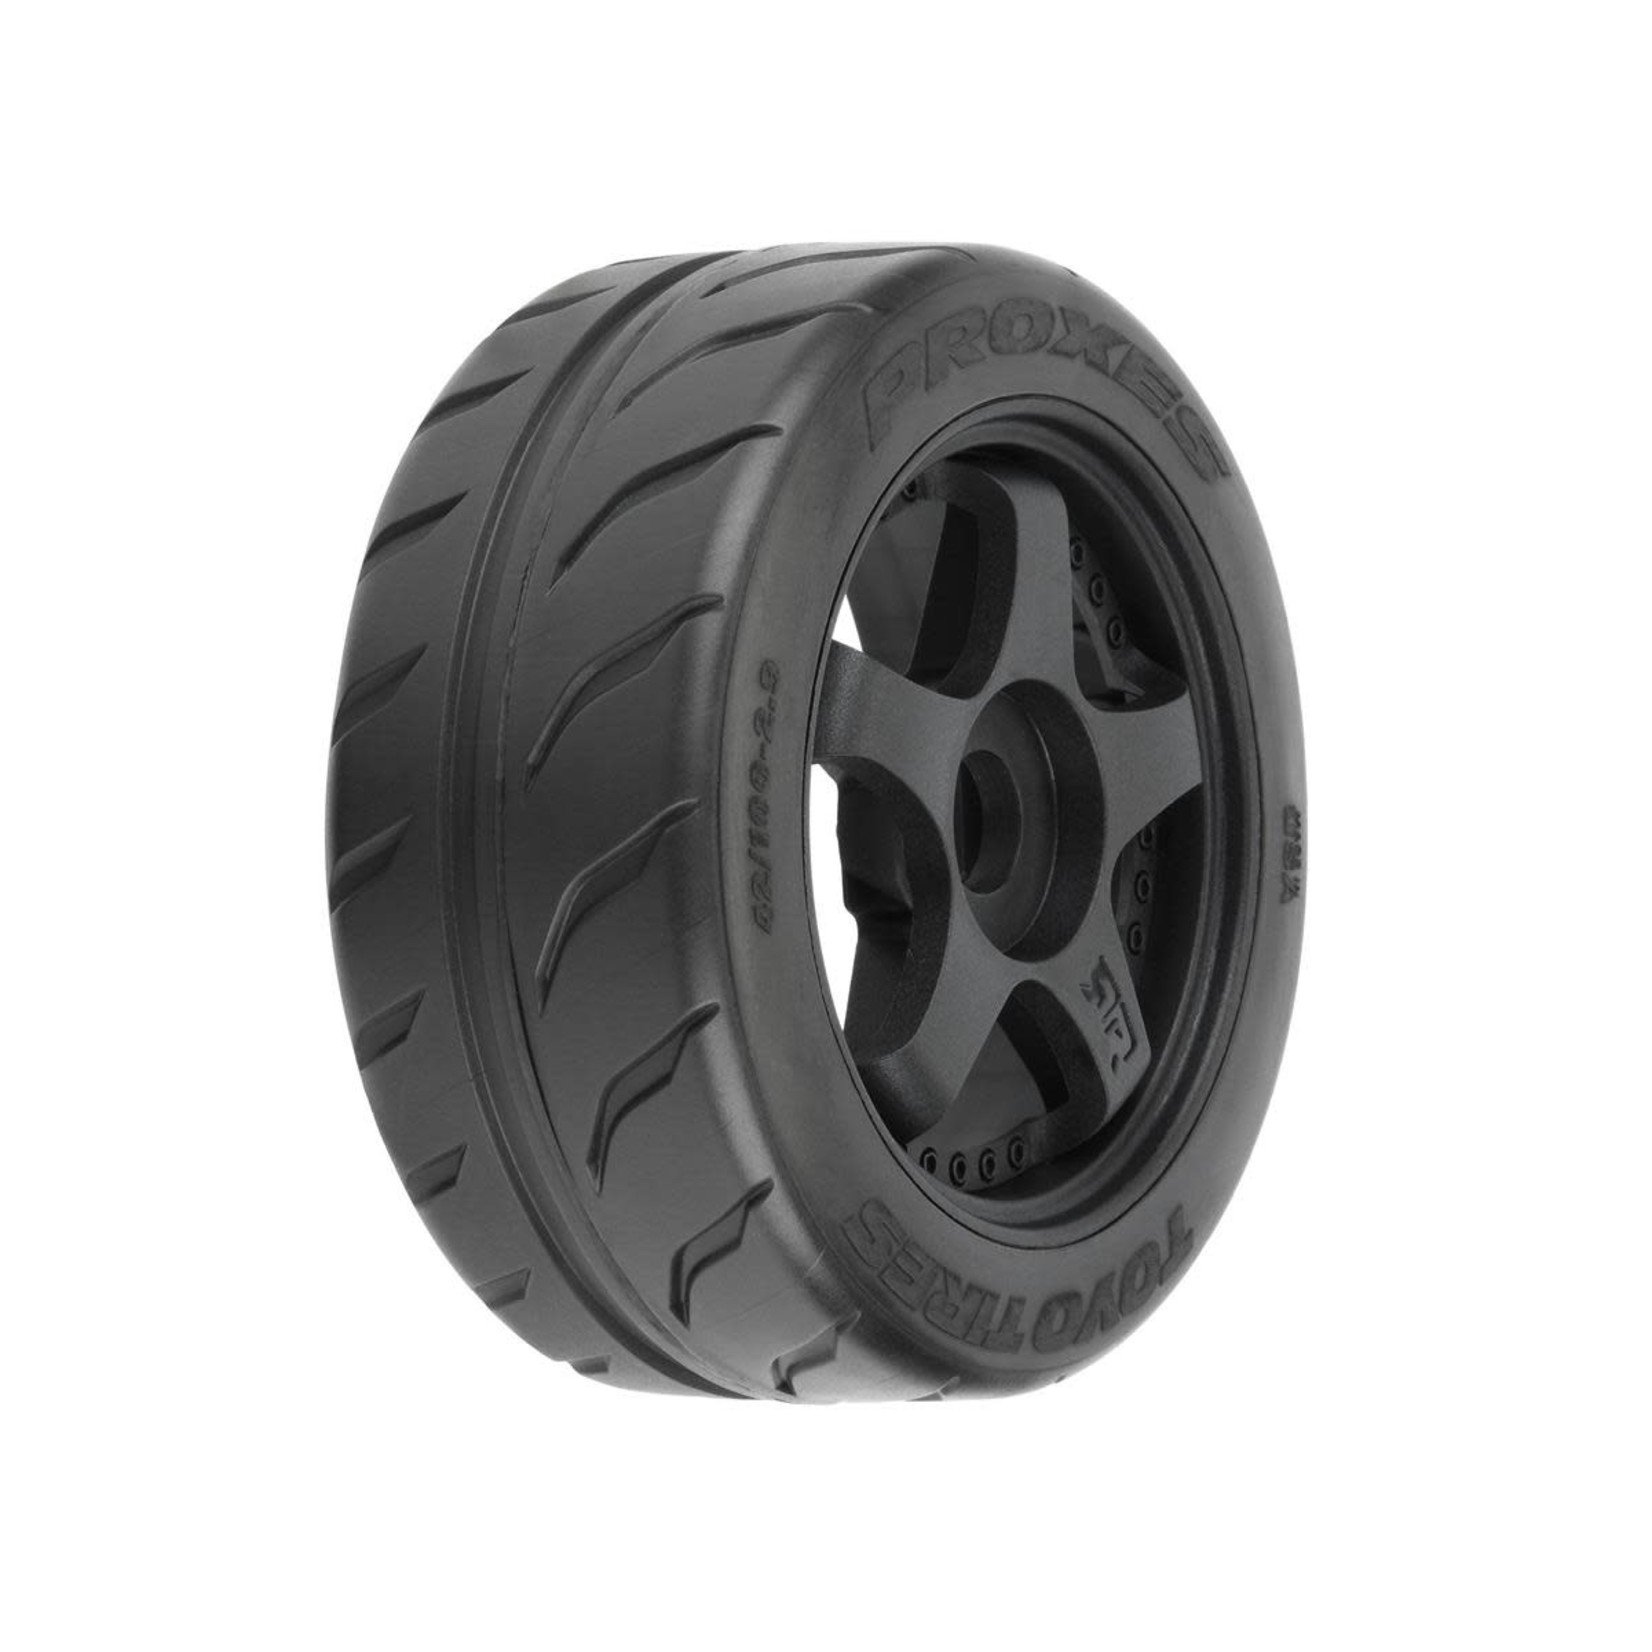 Pro-Line Pro-Line Toyo Proxes R888R 42/100 2.9" Belted 5-Spoke Pre-mounted Tires (2) (S3) #10199-10